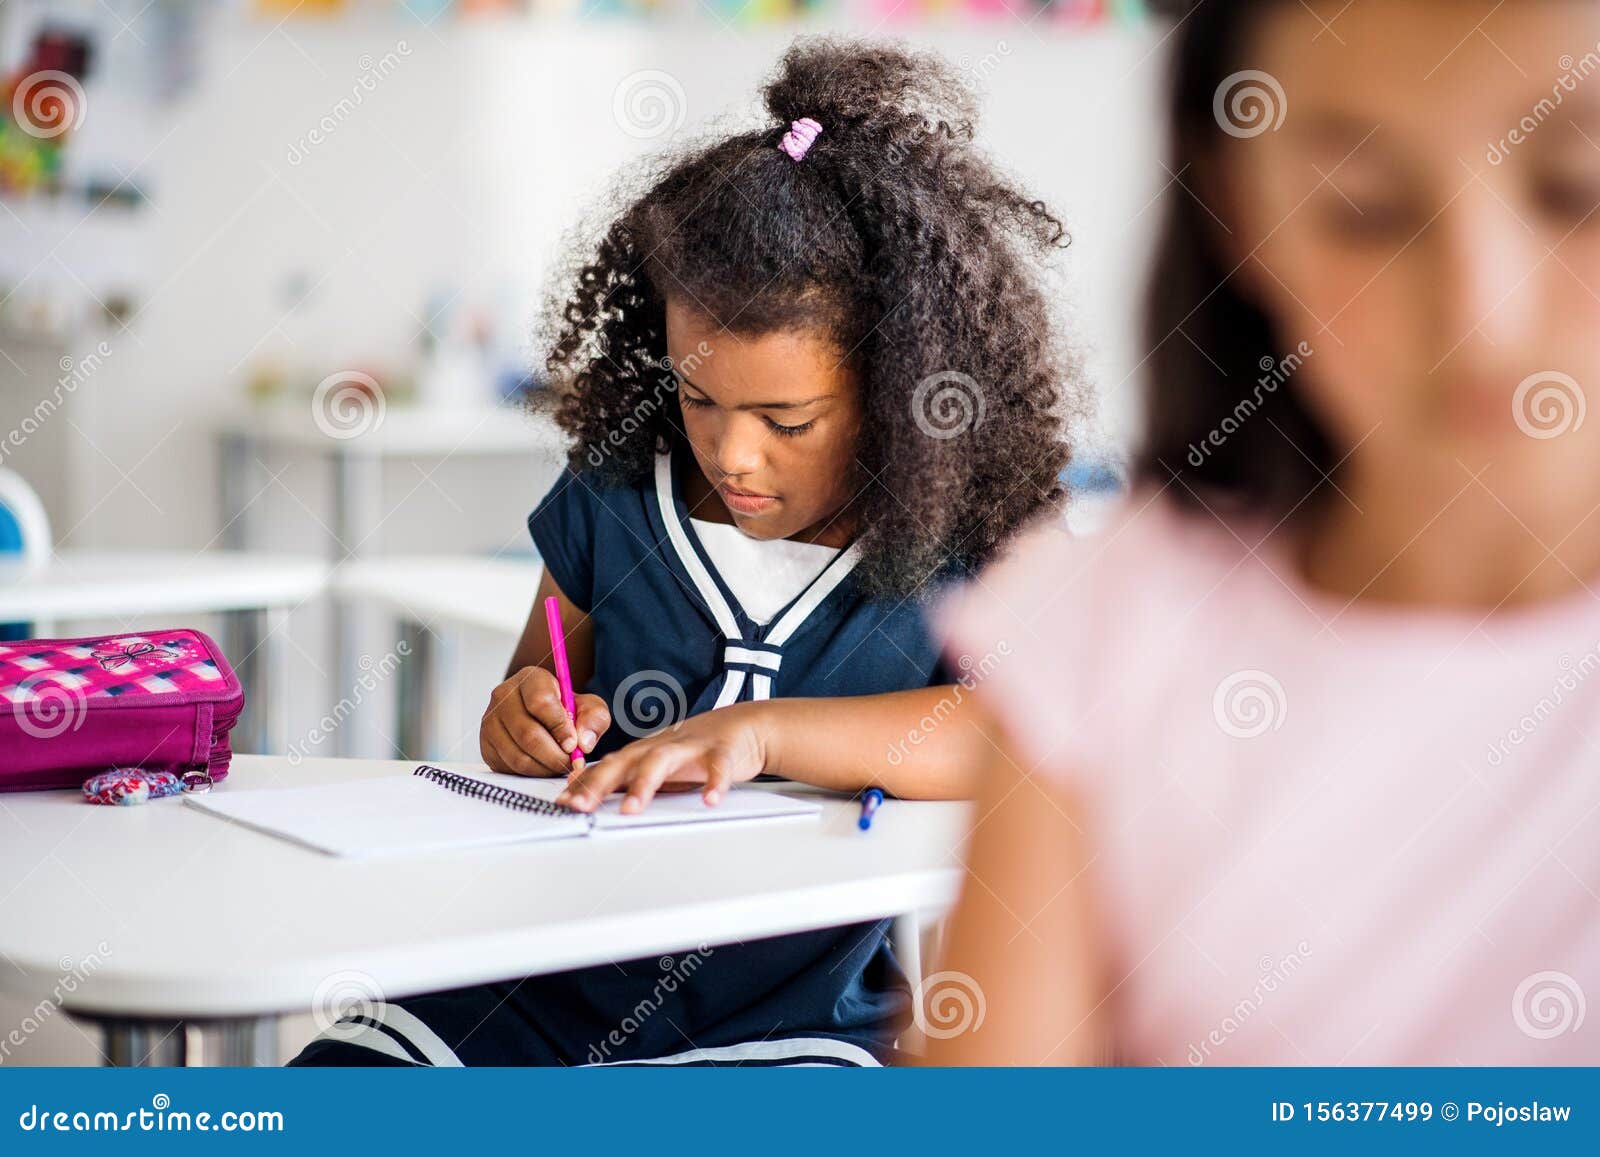 A Small School Girl Sitting At The Desk In Classroom Writing